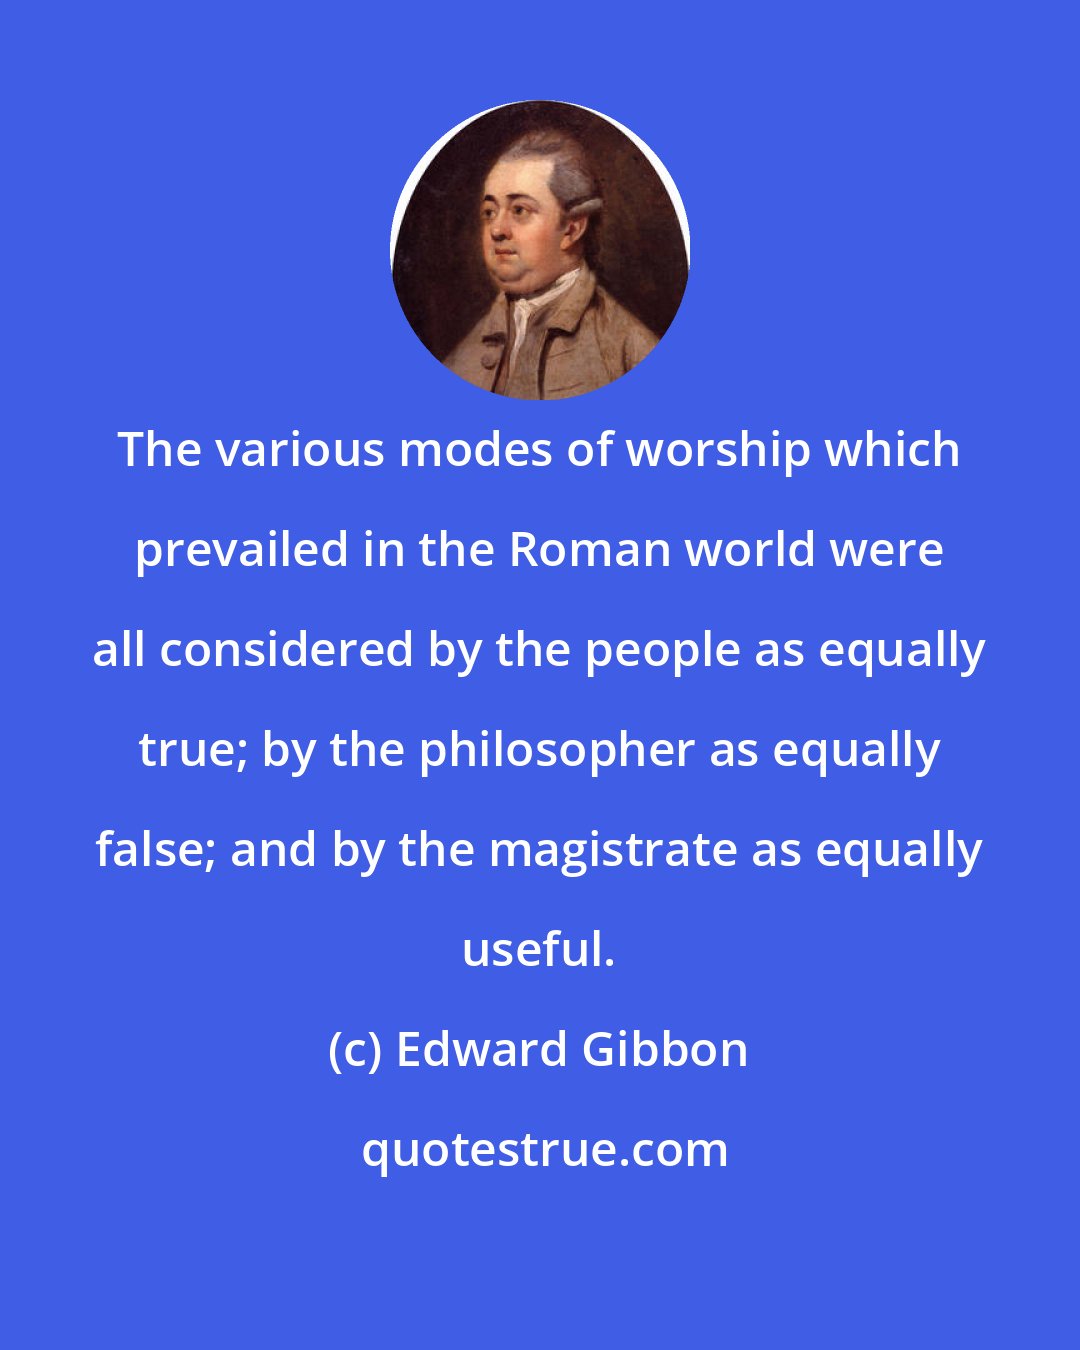 Edward Gibbon: The various modes of worship which prevailed in the Roman world were all considered by the people as equally true; by the philosopher as equally false; and by the magistrate as equally useful.